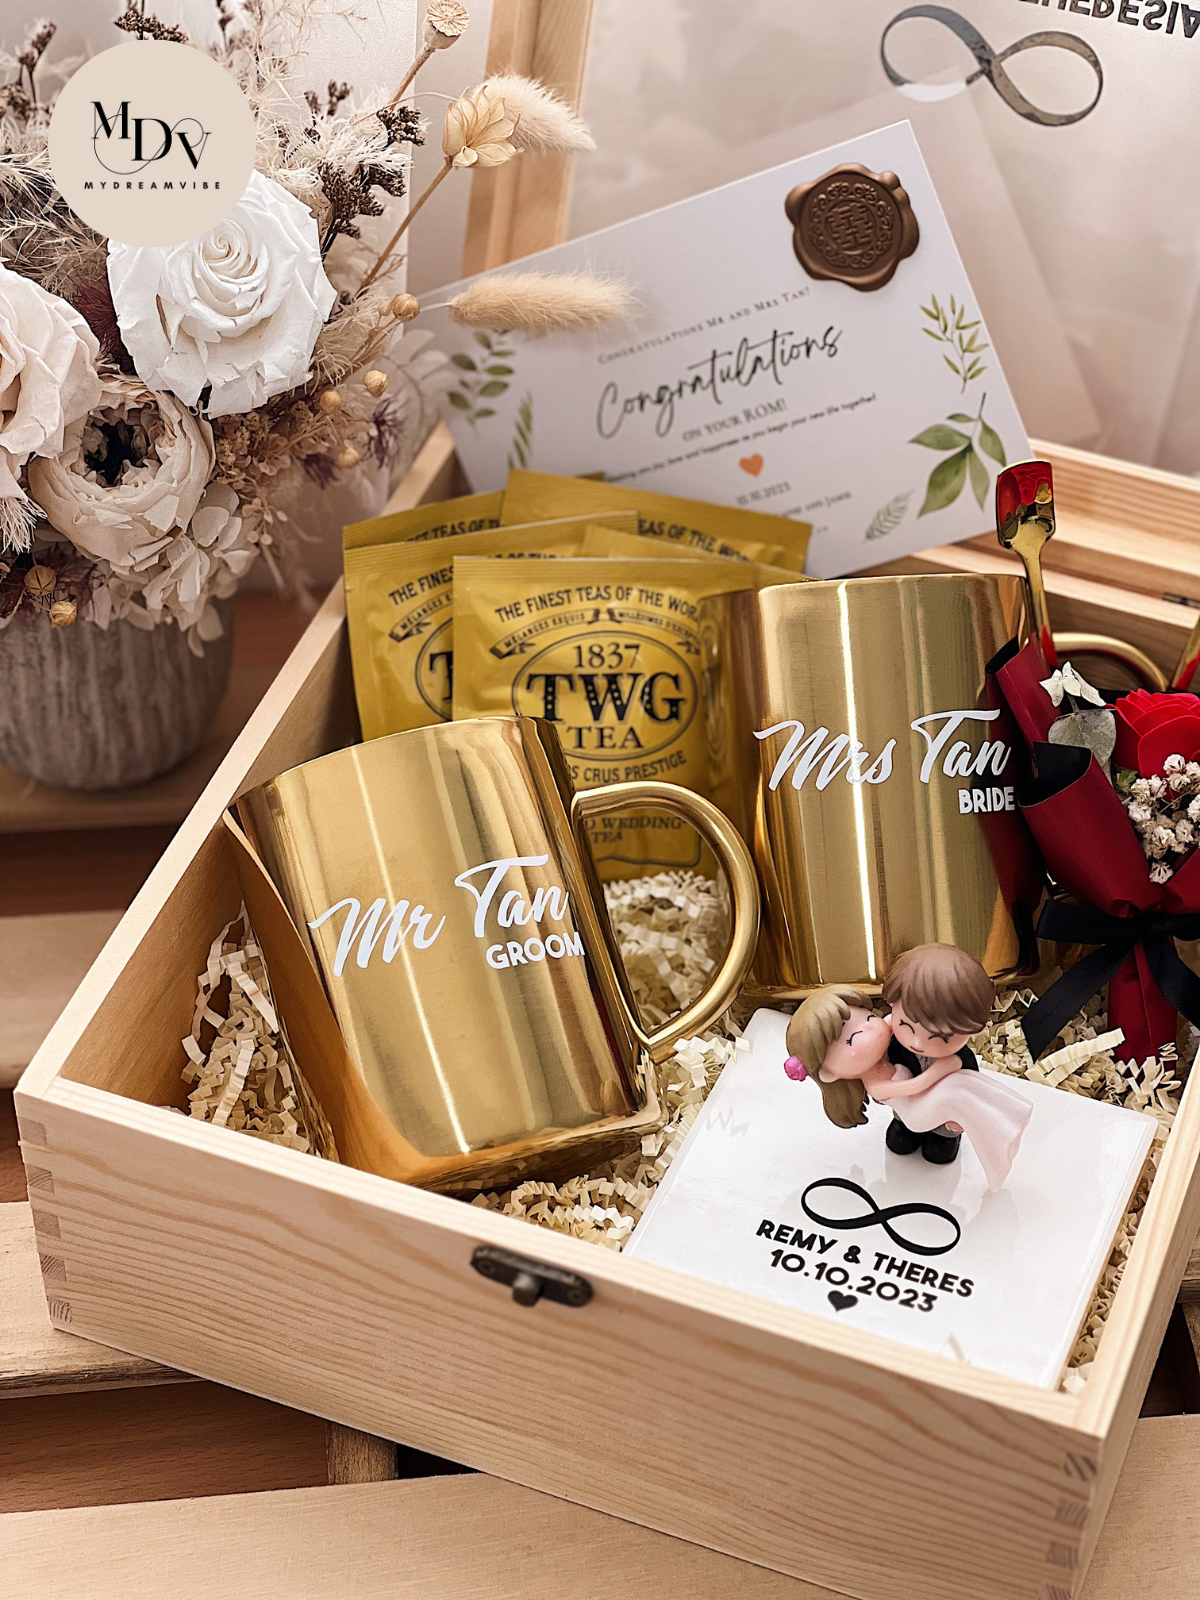 Wedding Gift  - Stainless Steel Gold Mug with Figurine Display and TWG Grand Wedding Tea in Wooden Box